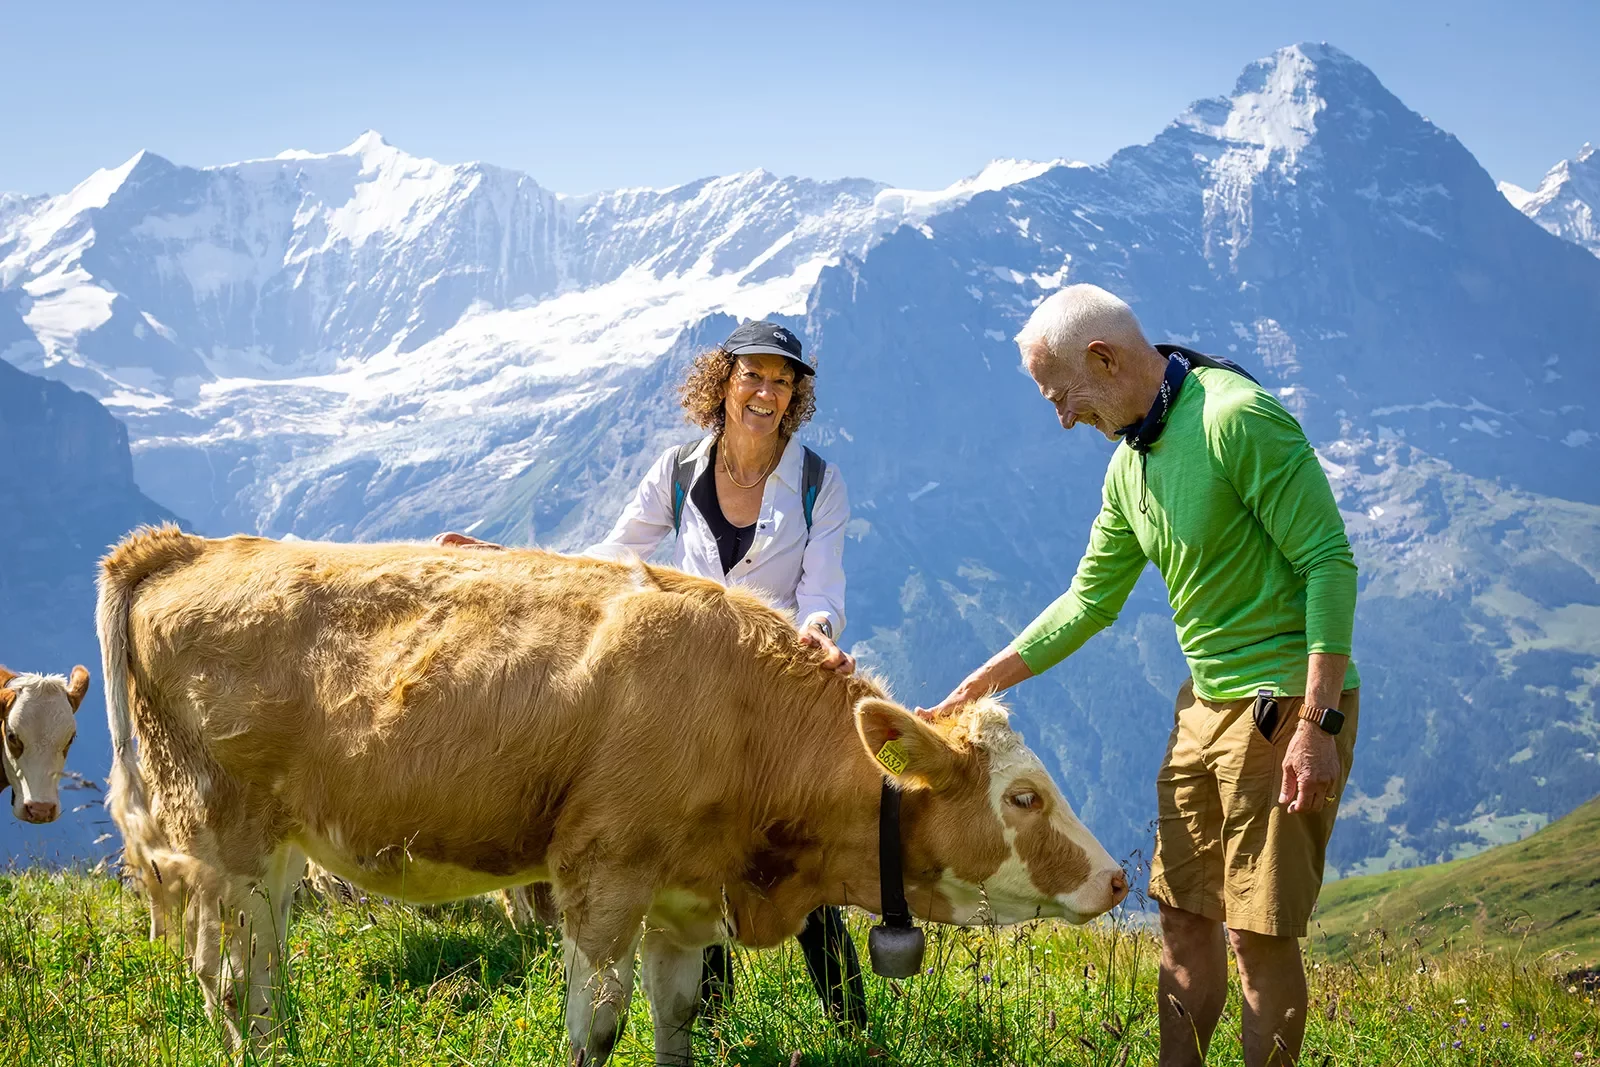 Two guests petting cow, mountain range in background.